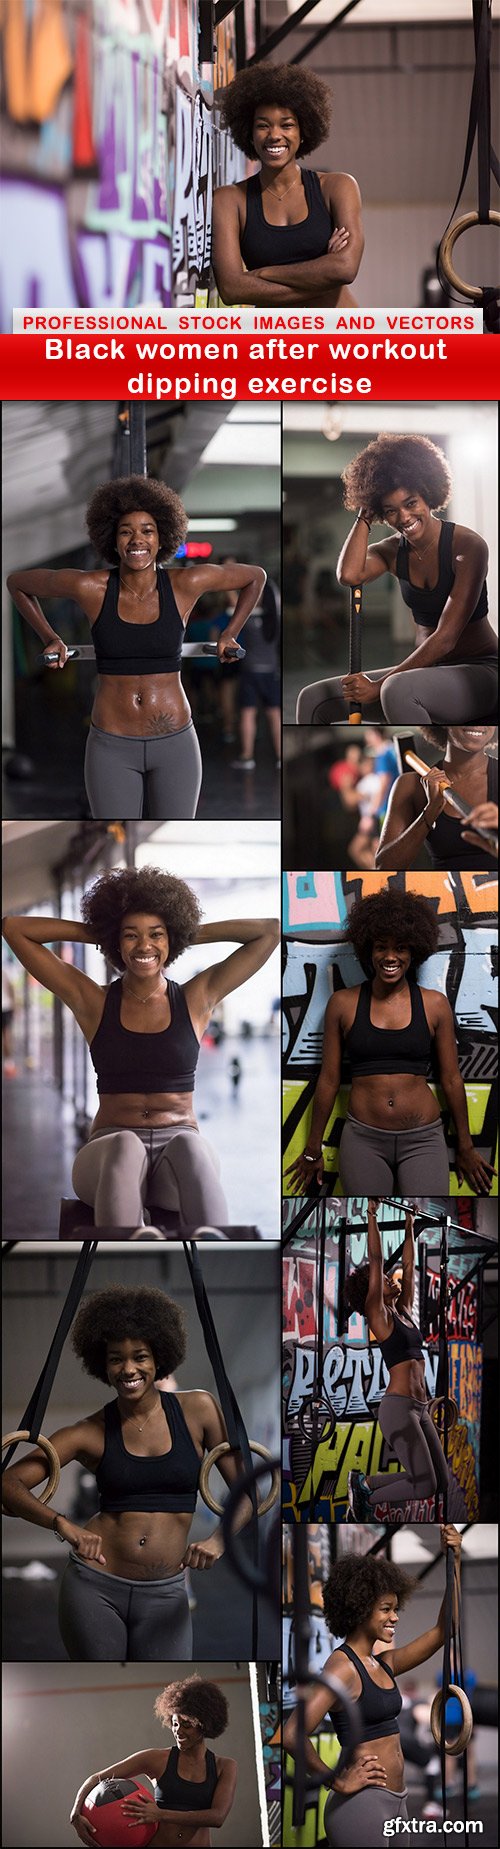 Black women after workout dipping exercise - 10 UHQ JPEG